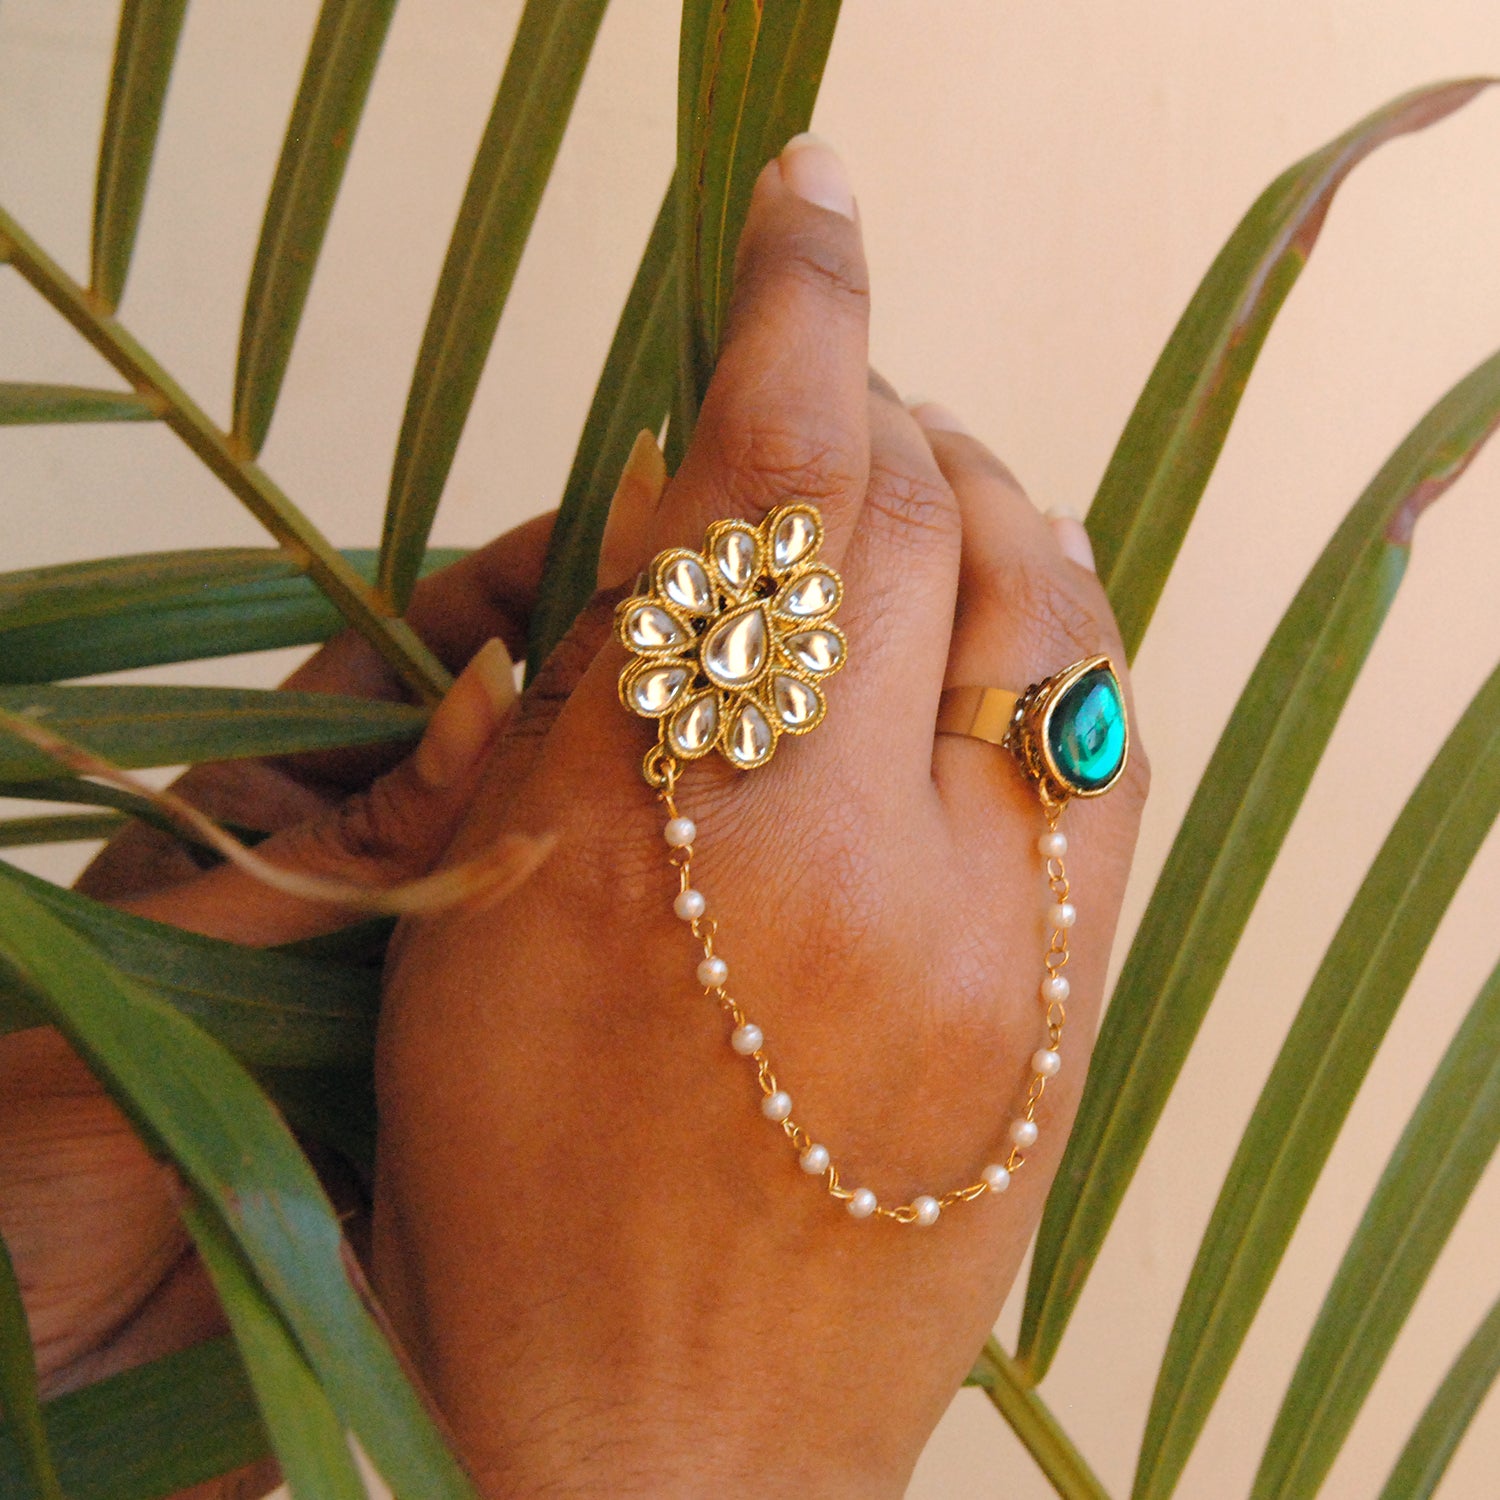 Beabhika Handmade Artificial Jewelry Adjustable Kundan Ring Gold Tone Two Finger Ring Adjustable Kundan Statement Rings Cocktail Easy To Wear Green Color Rings White Pearl Chain Ring Gold Tone Rings Available On COD In India Delhi Traditional Heeramandi Style Jewelry